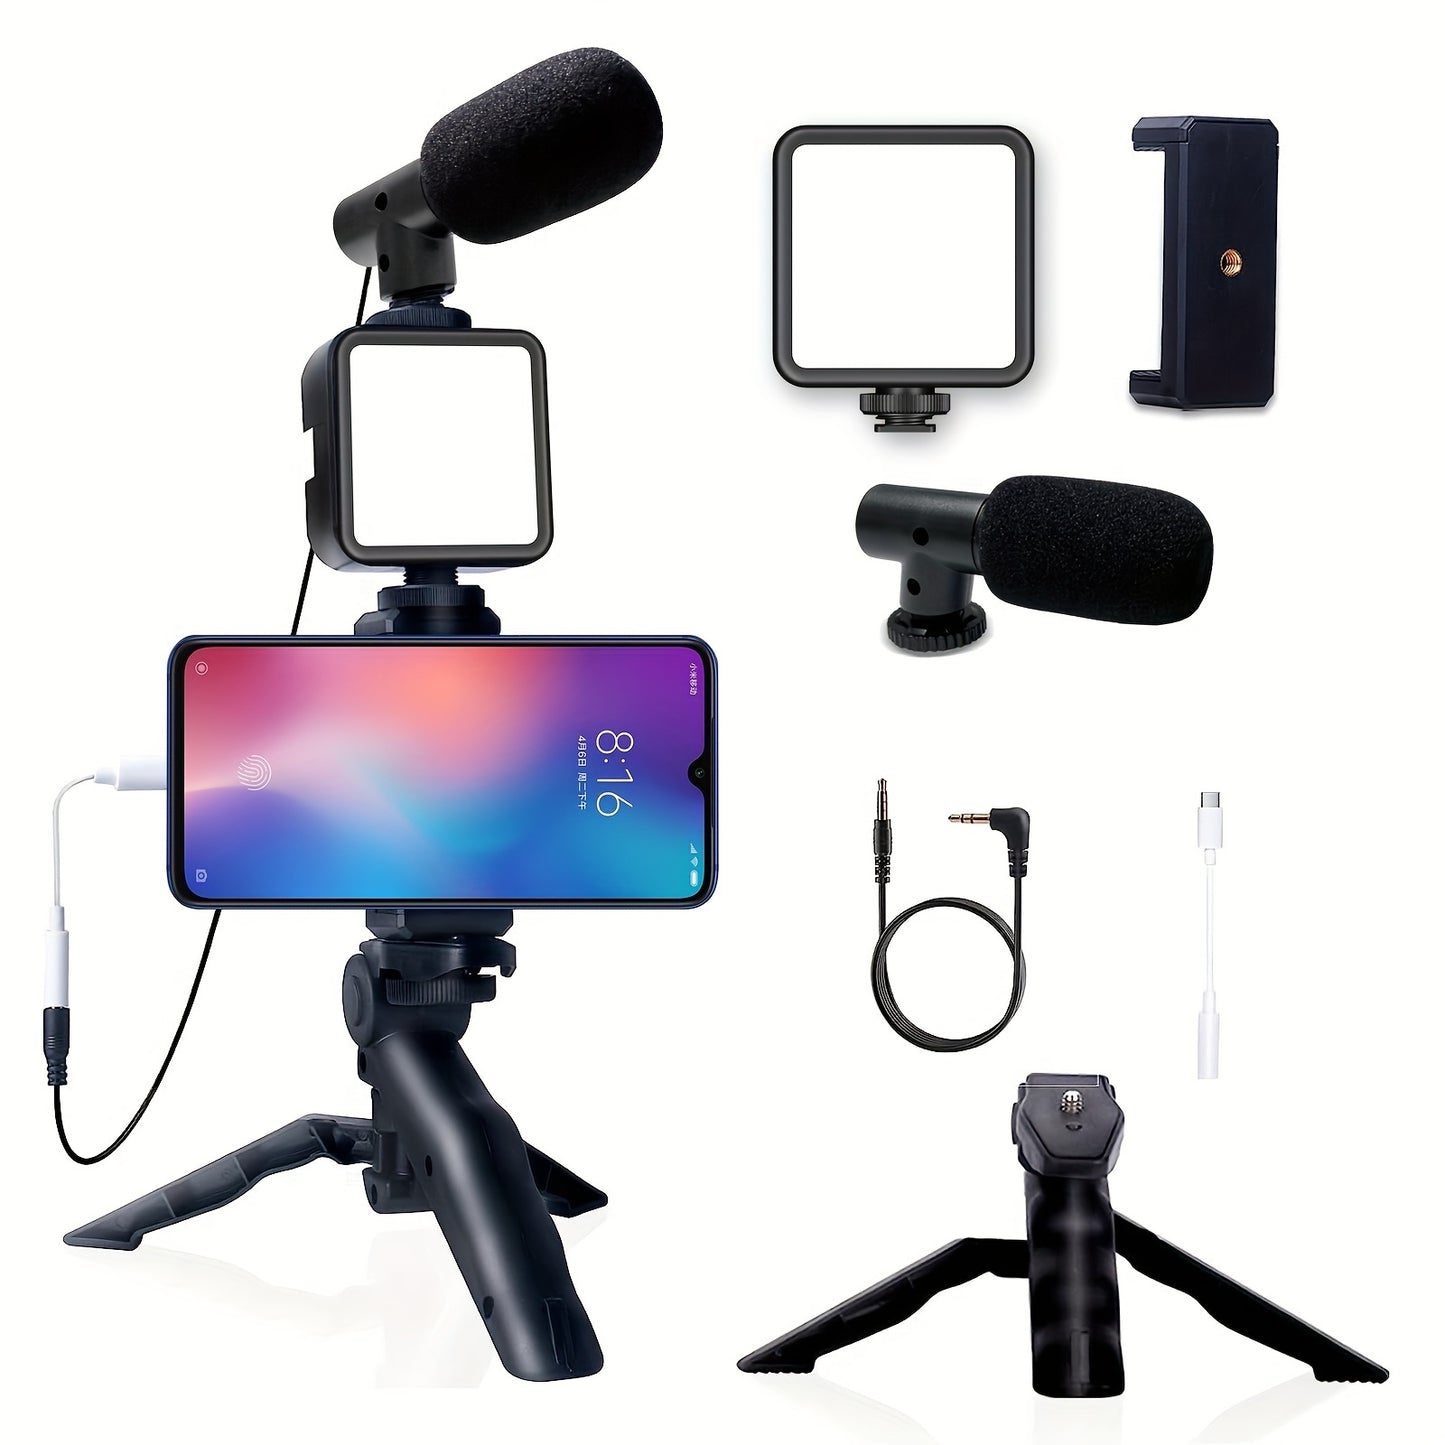 BTFOOR Vlogging Kit For IPhone, Android With Tripod, 36 LED Light, YouTube Starter Kit With Mini Microphone For Live Stream, Video Calls, Vlogging, YouTube, Instagram TikTok